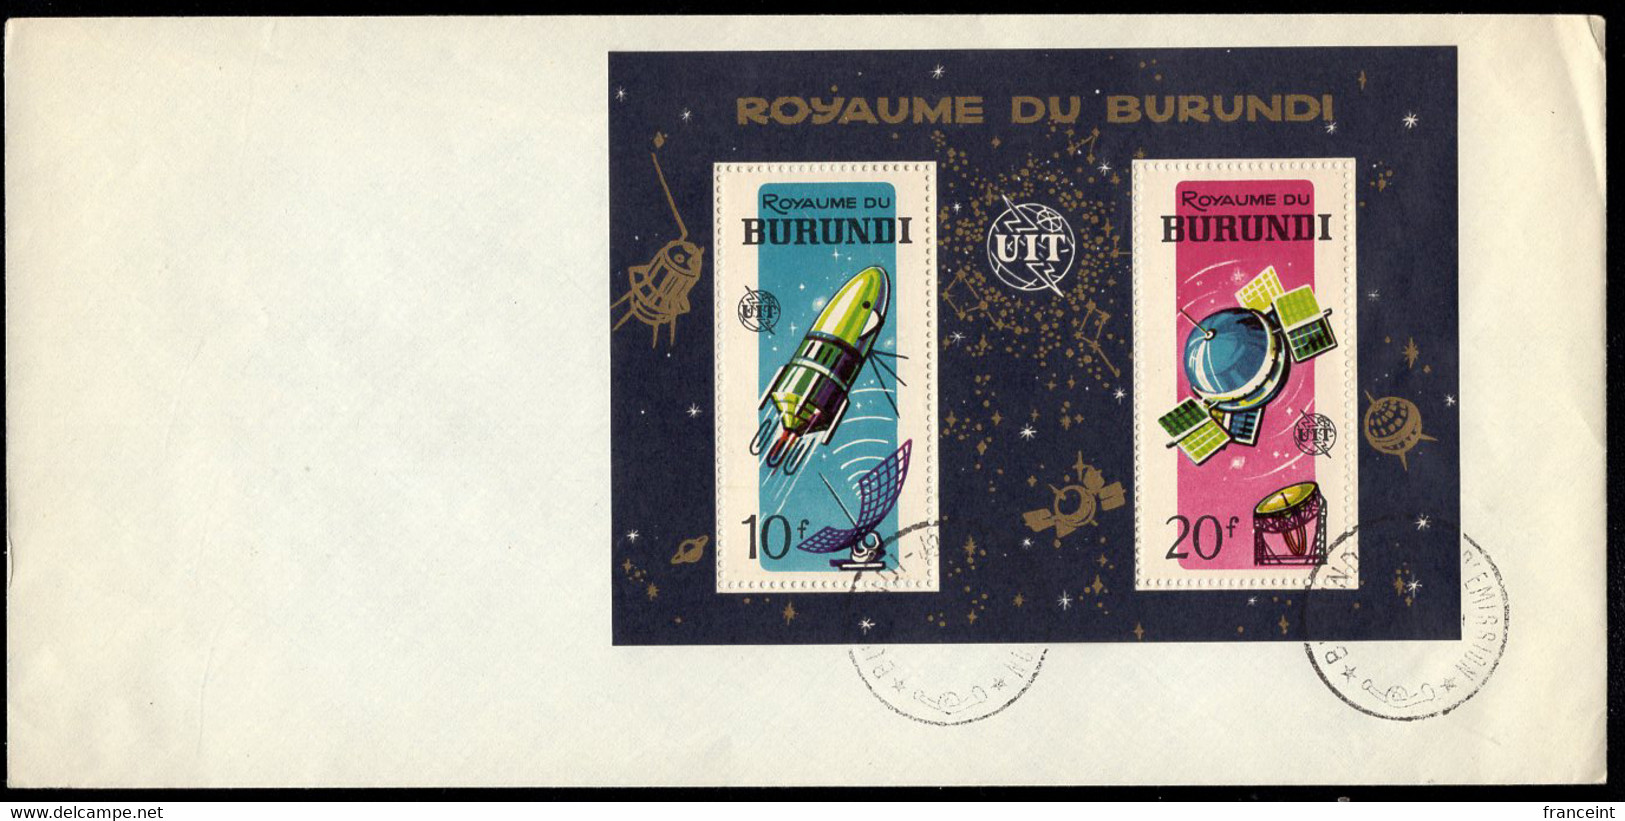 BURUNDI(1965) ITU Centennial. Set Of 2 Unaddressed FDCs, Perf & Imperf. Mentioned After Scott Nos 126-33. - FDC